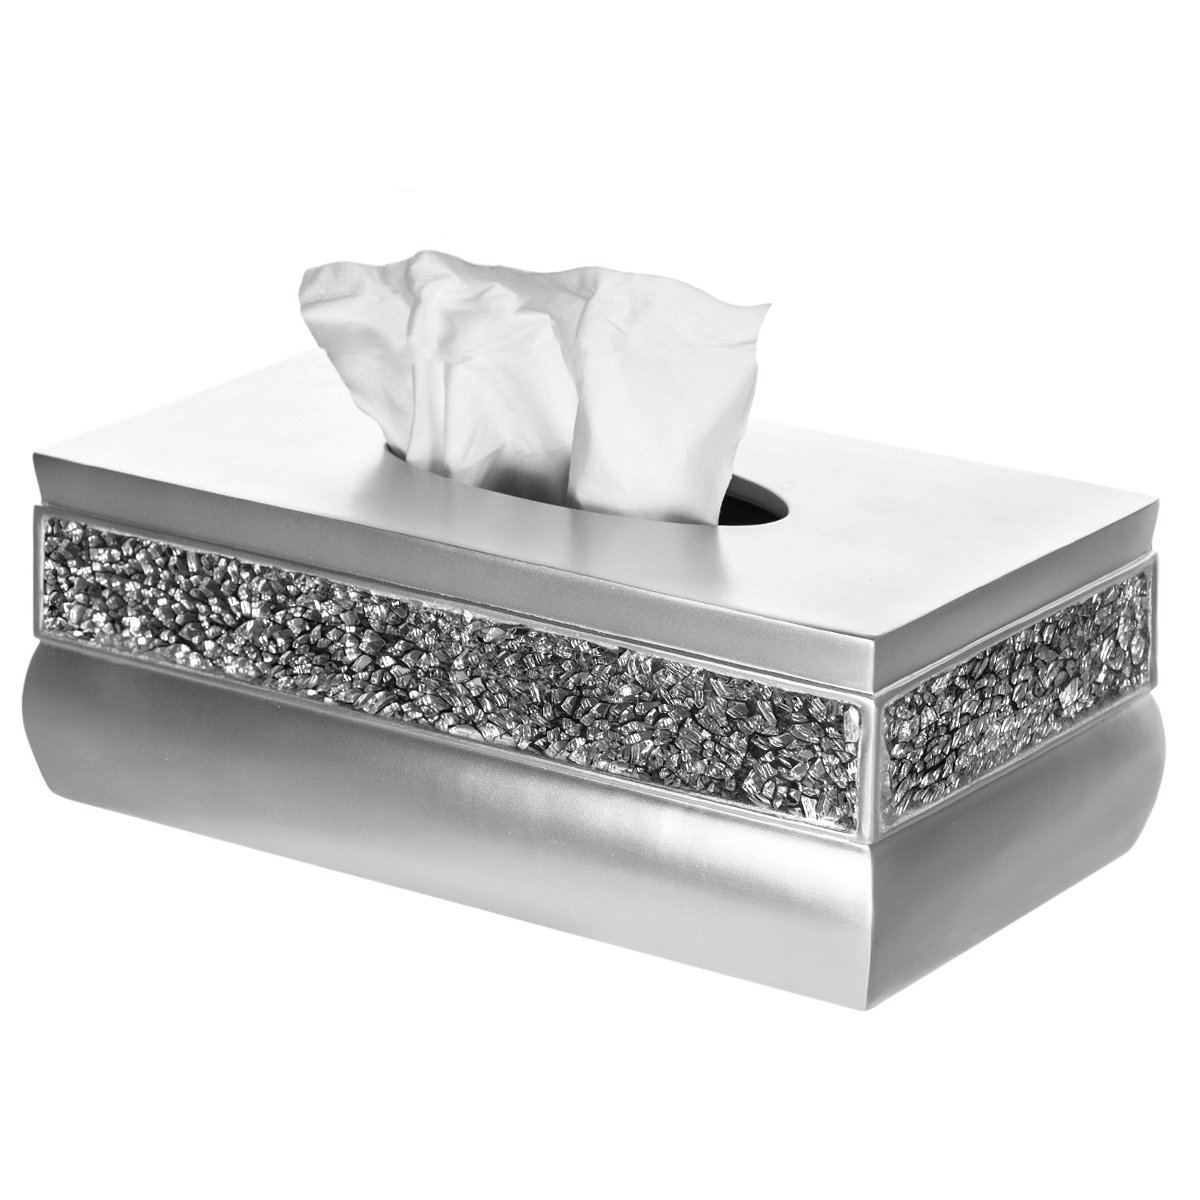 Book Cover Creative Scents Silver Tissue Box Cover Rectangular - Decorative Tissue Box Holder With Beautiful Mosaic Glass - Elegant Bling Tissue Holder For Bathroom With Durable Bottom Slider (Silver Collection)